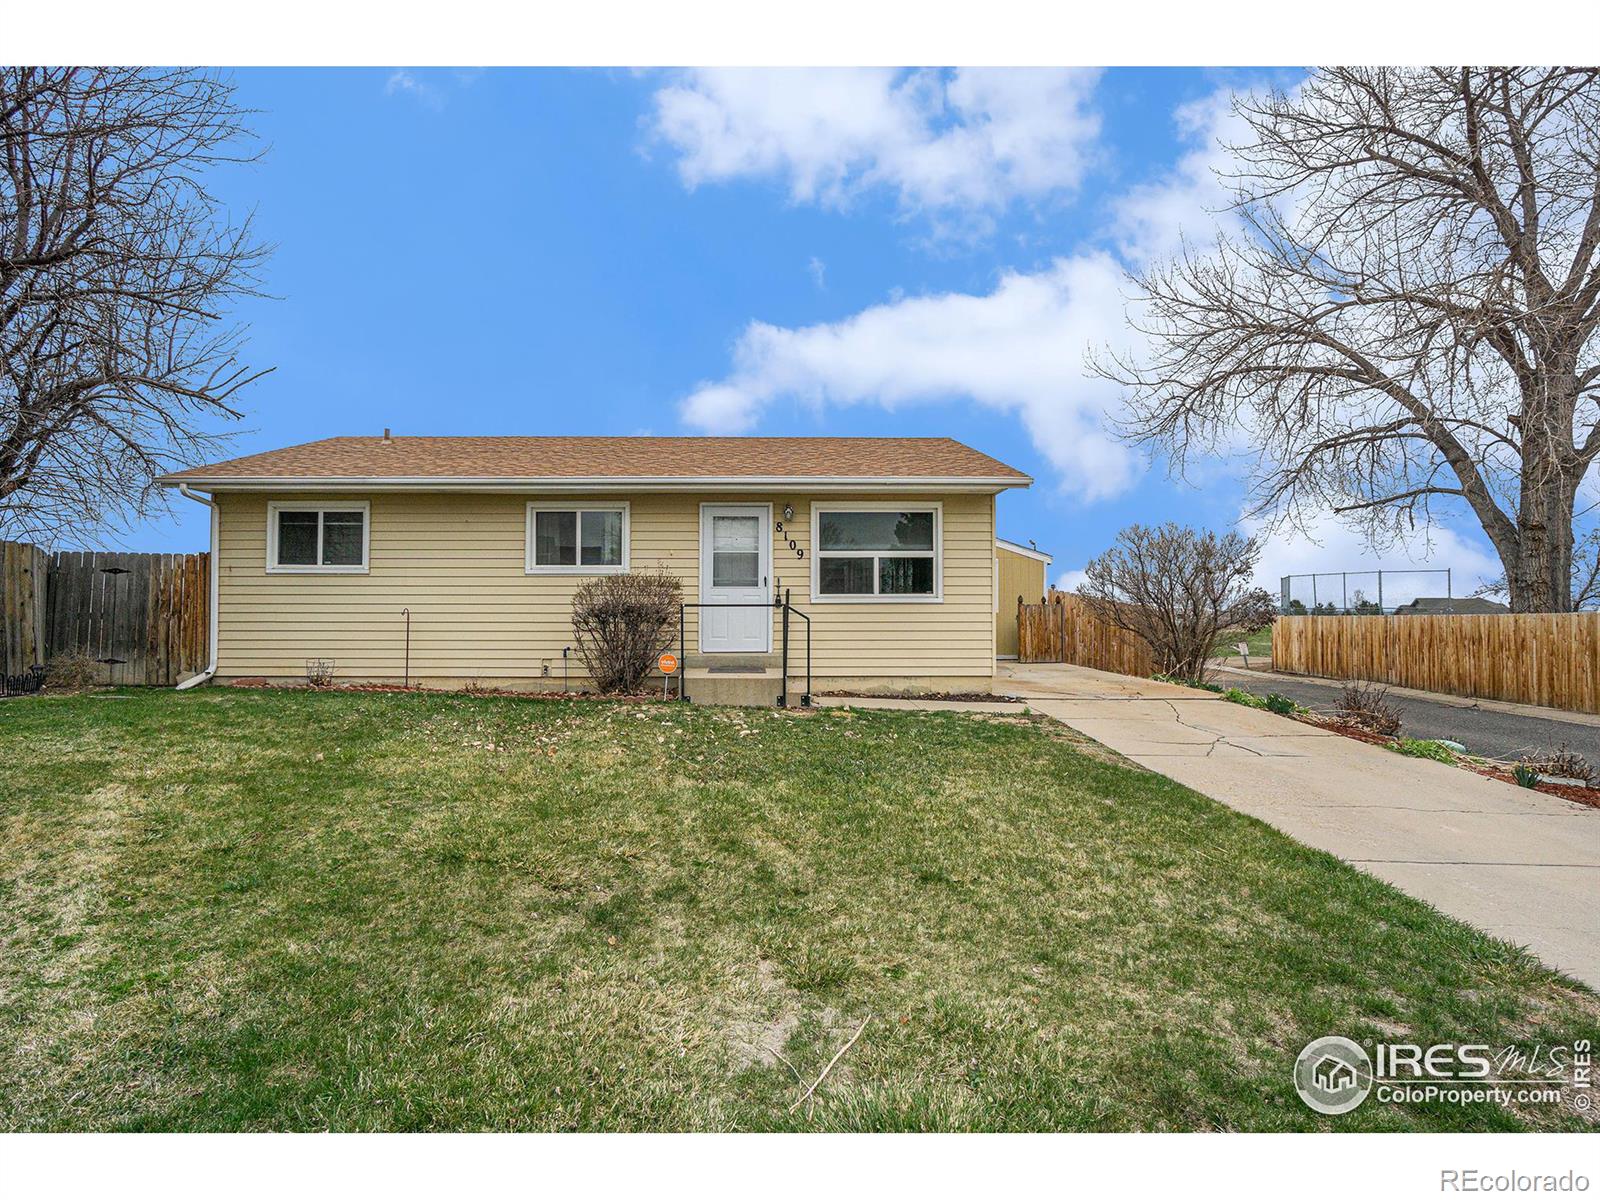 8109  Taylor Court, fort collins MLS: 4567891006282 Beds: 3 Baths: 1 Price: $360,000